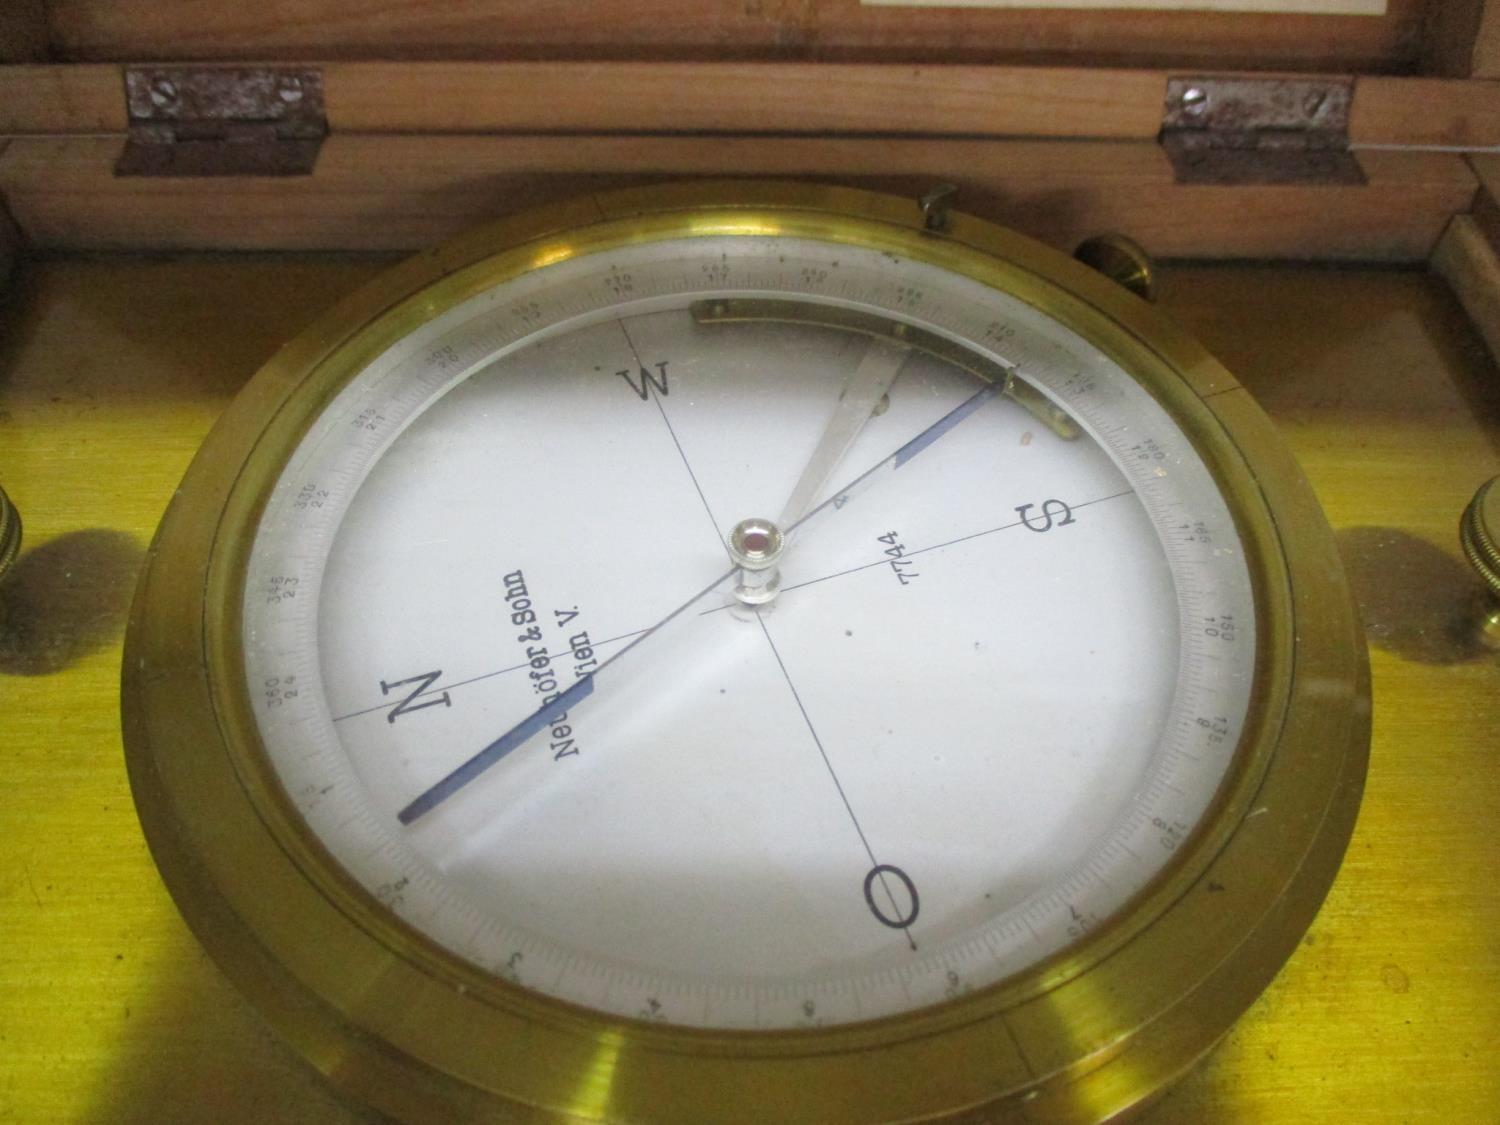 A Neuhofer & Son lacquered brass compass in a box - Image 2 of 2